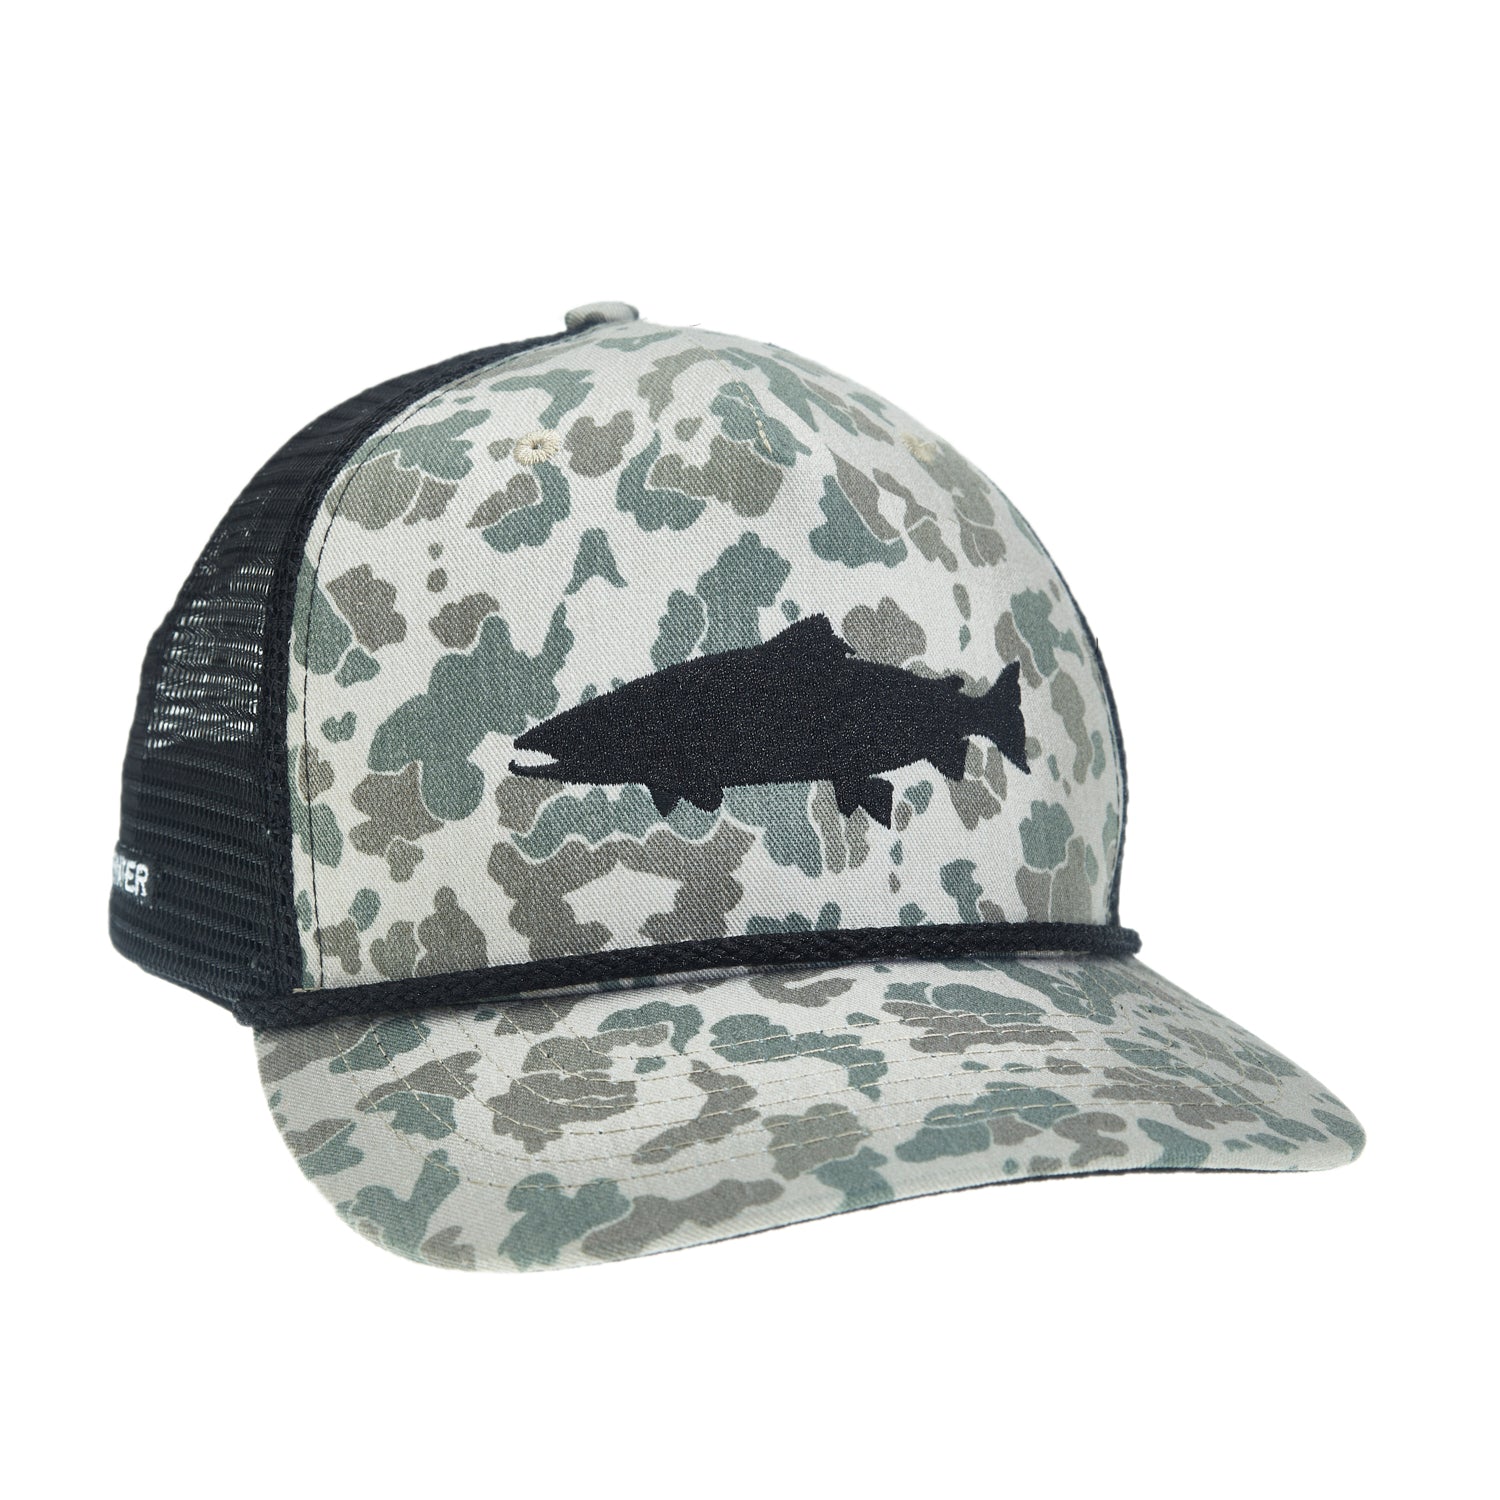 A hat with black mesh in the back and green and brown camo pattern and an black embroidered trout on the front. A black rope is over the bill